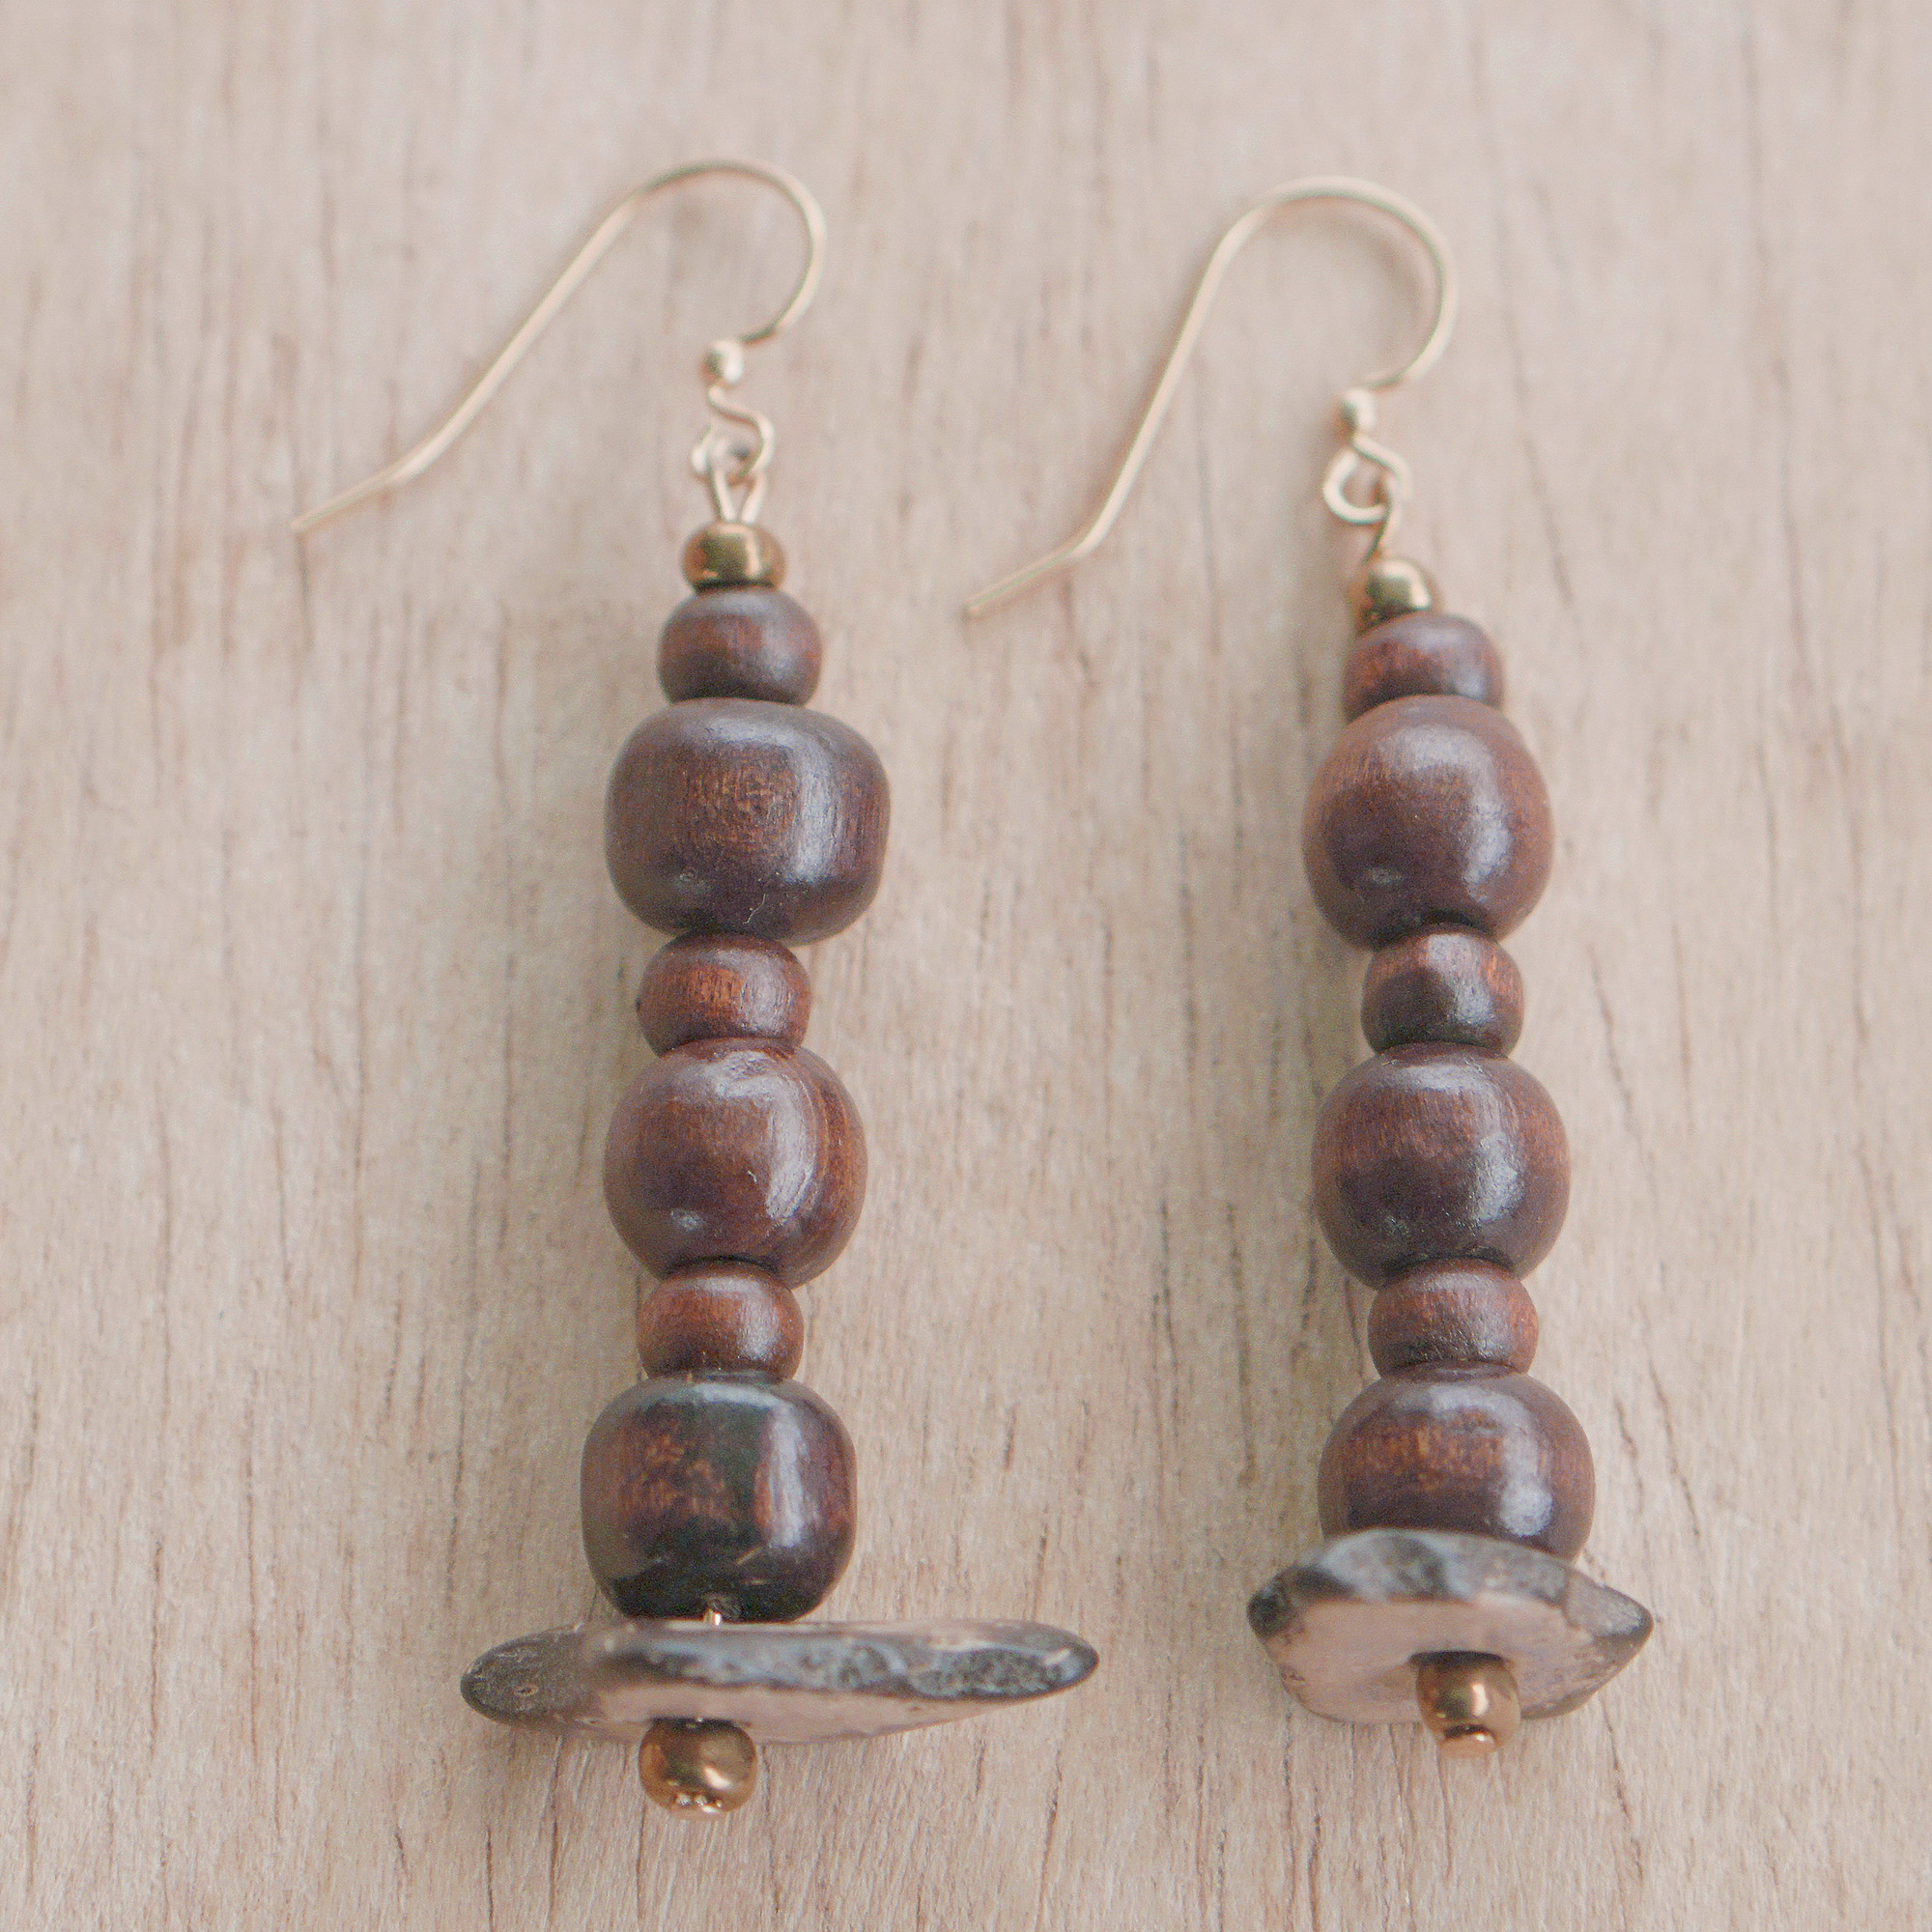 Kiva Store  Sese Wood Coconut Shell and Plastic Earrings from